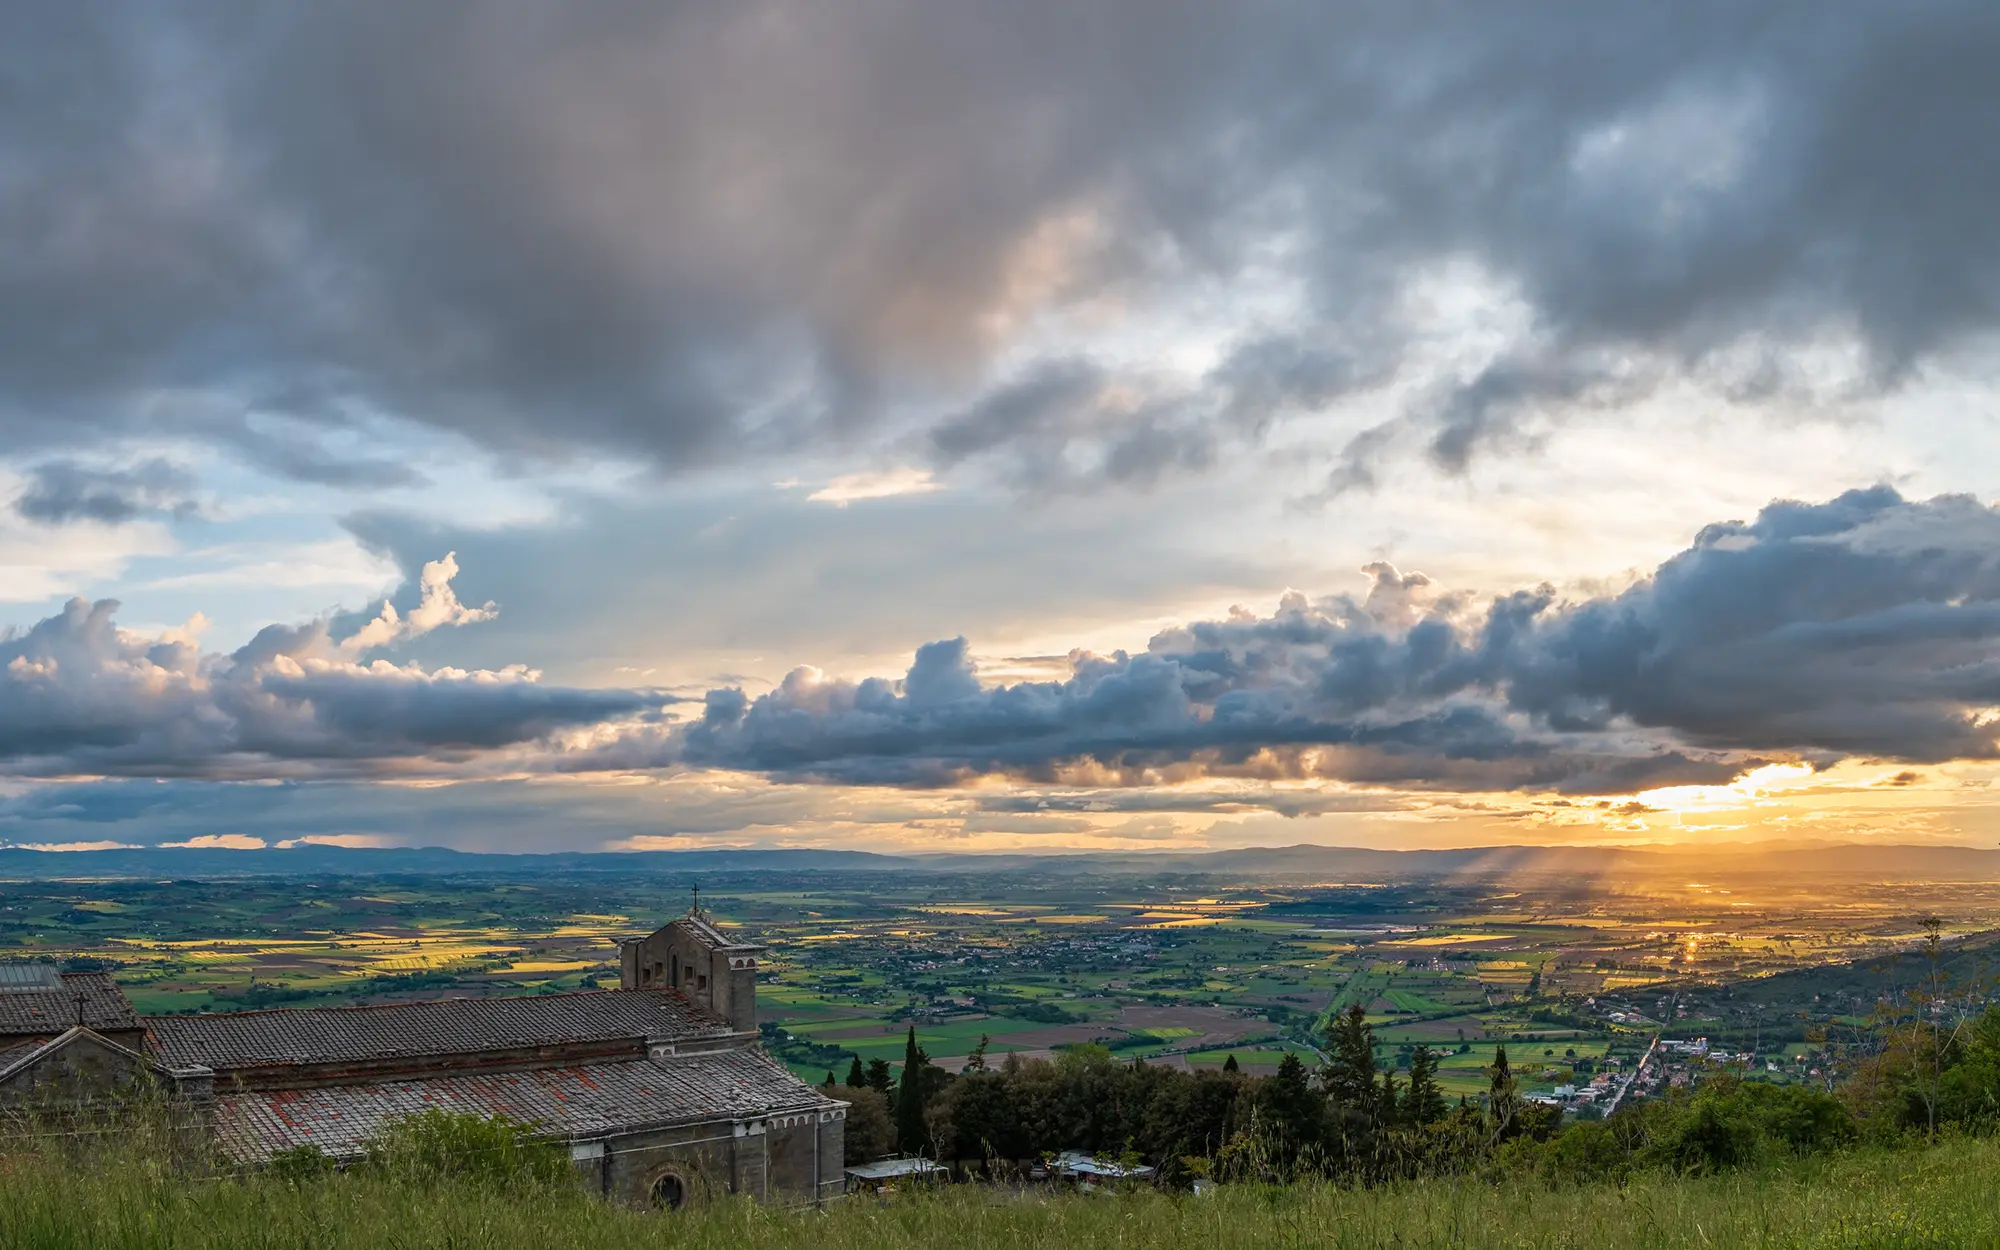 Sundown over the valley, as seen from above Basilica di Santa Margherita in Cortona on May 14, 2023.